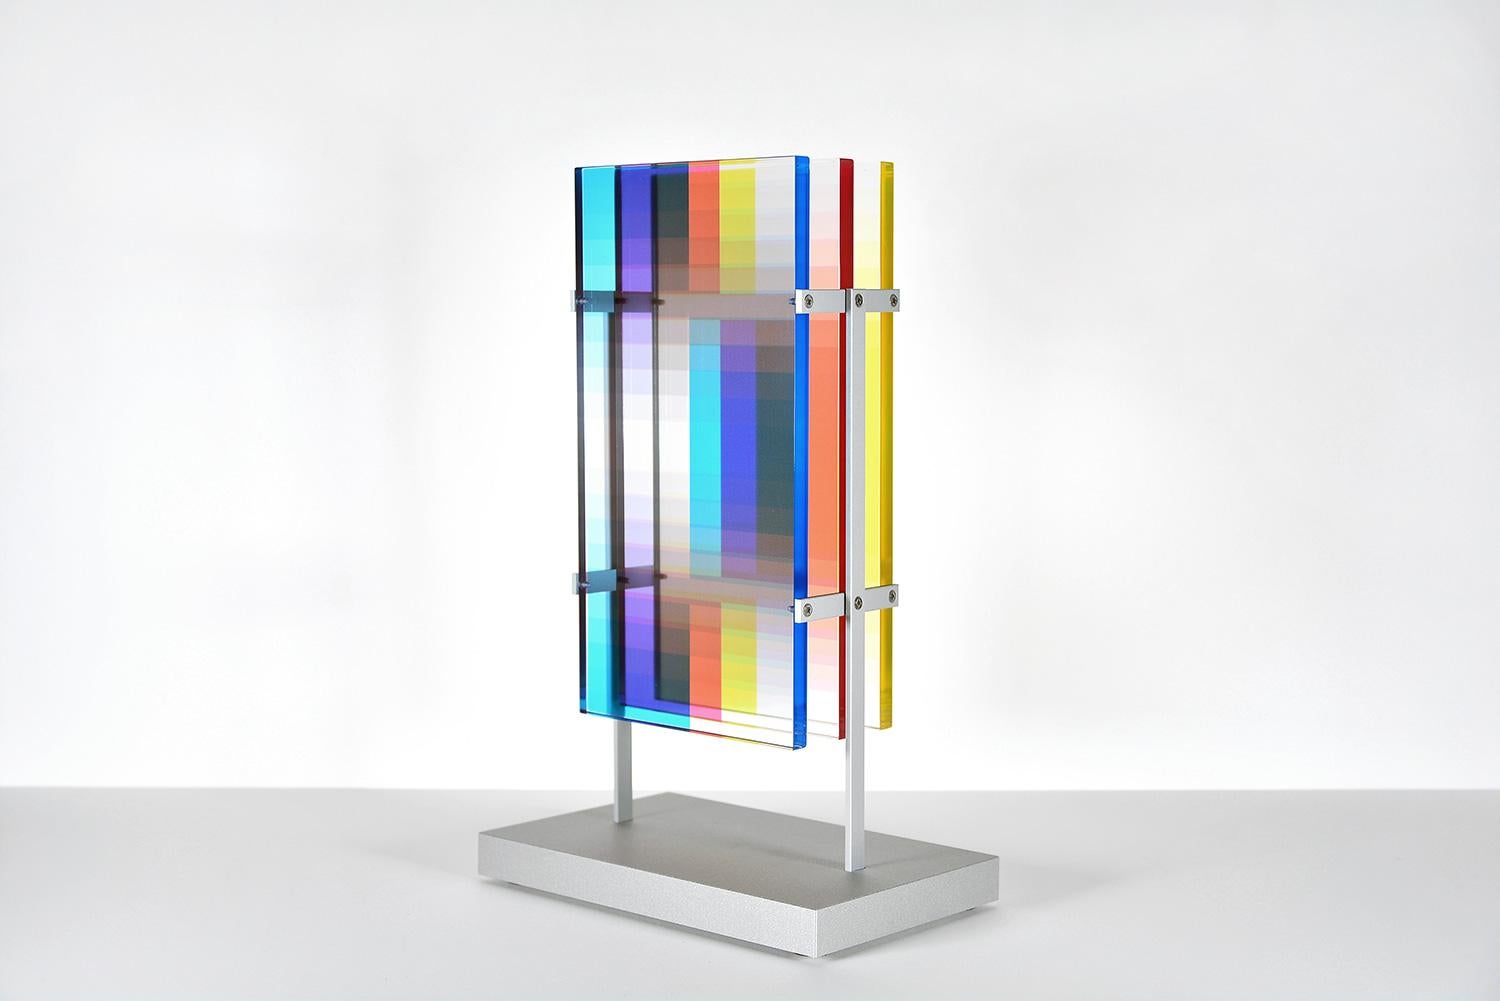 Felipe Pantone - SUBTRACTIVE VARIABILITY MANIPULABLE IV
Date of creation: 2020
Medium: Acrylic and aluminium
Edition number: 40/50
Size: 33 x 13 x 21 cm
Condition: New, in mint conditions
Sculpture made of acrylic and aluminium part of a limited